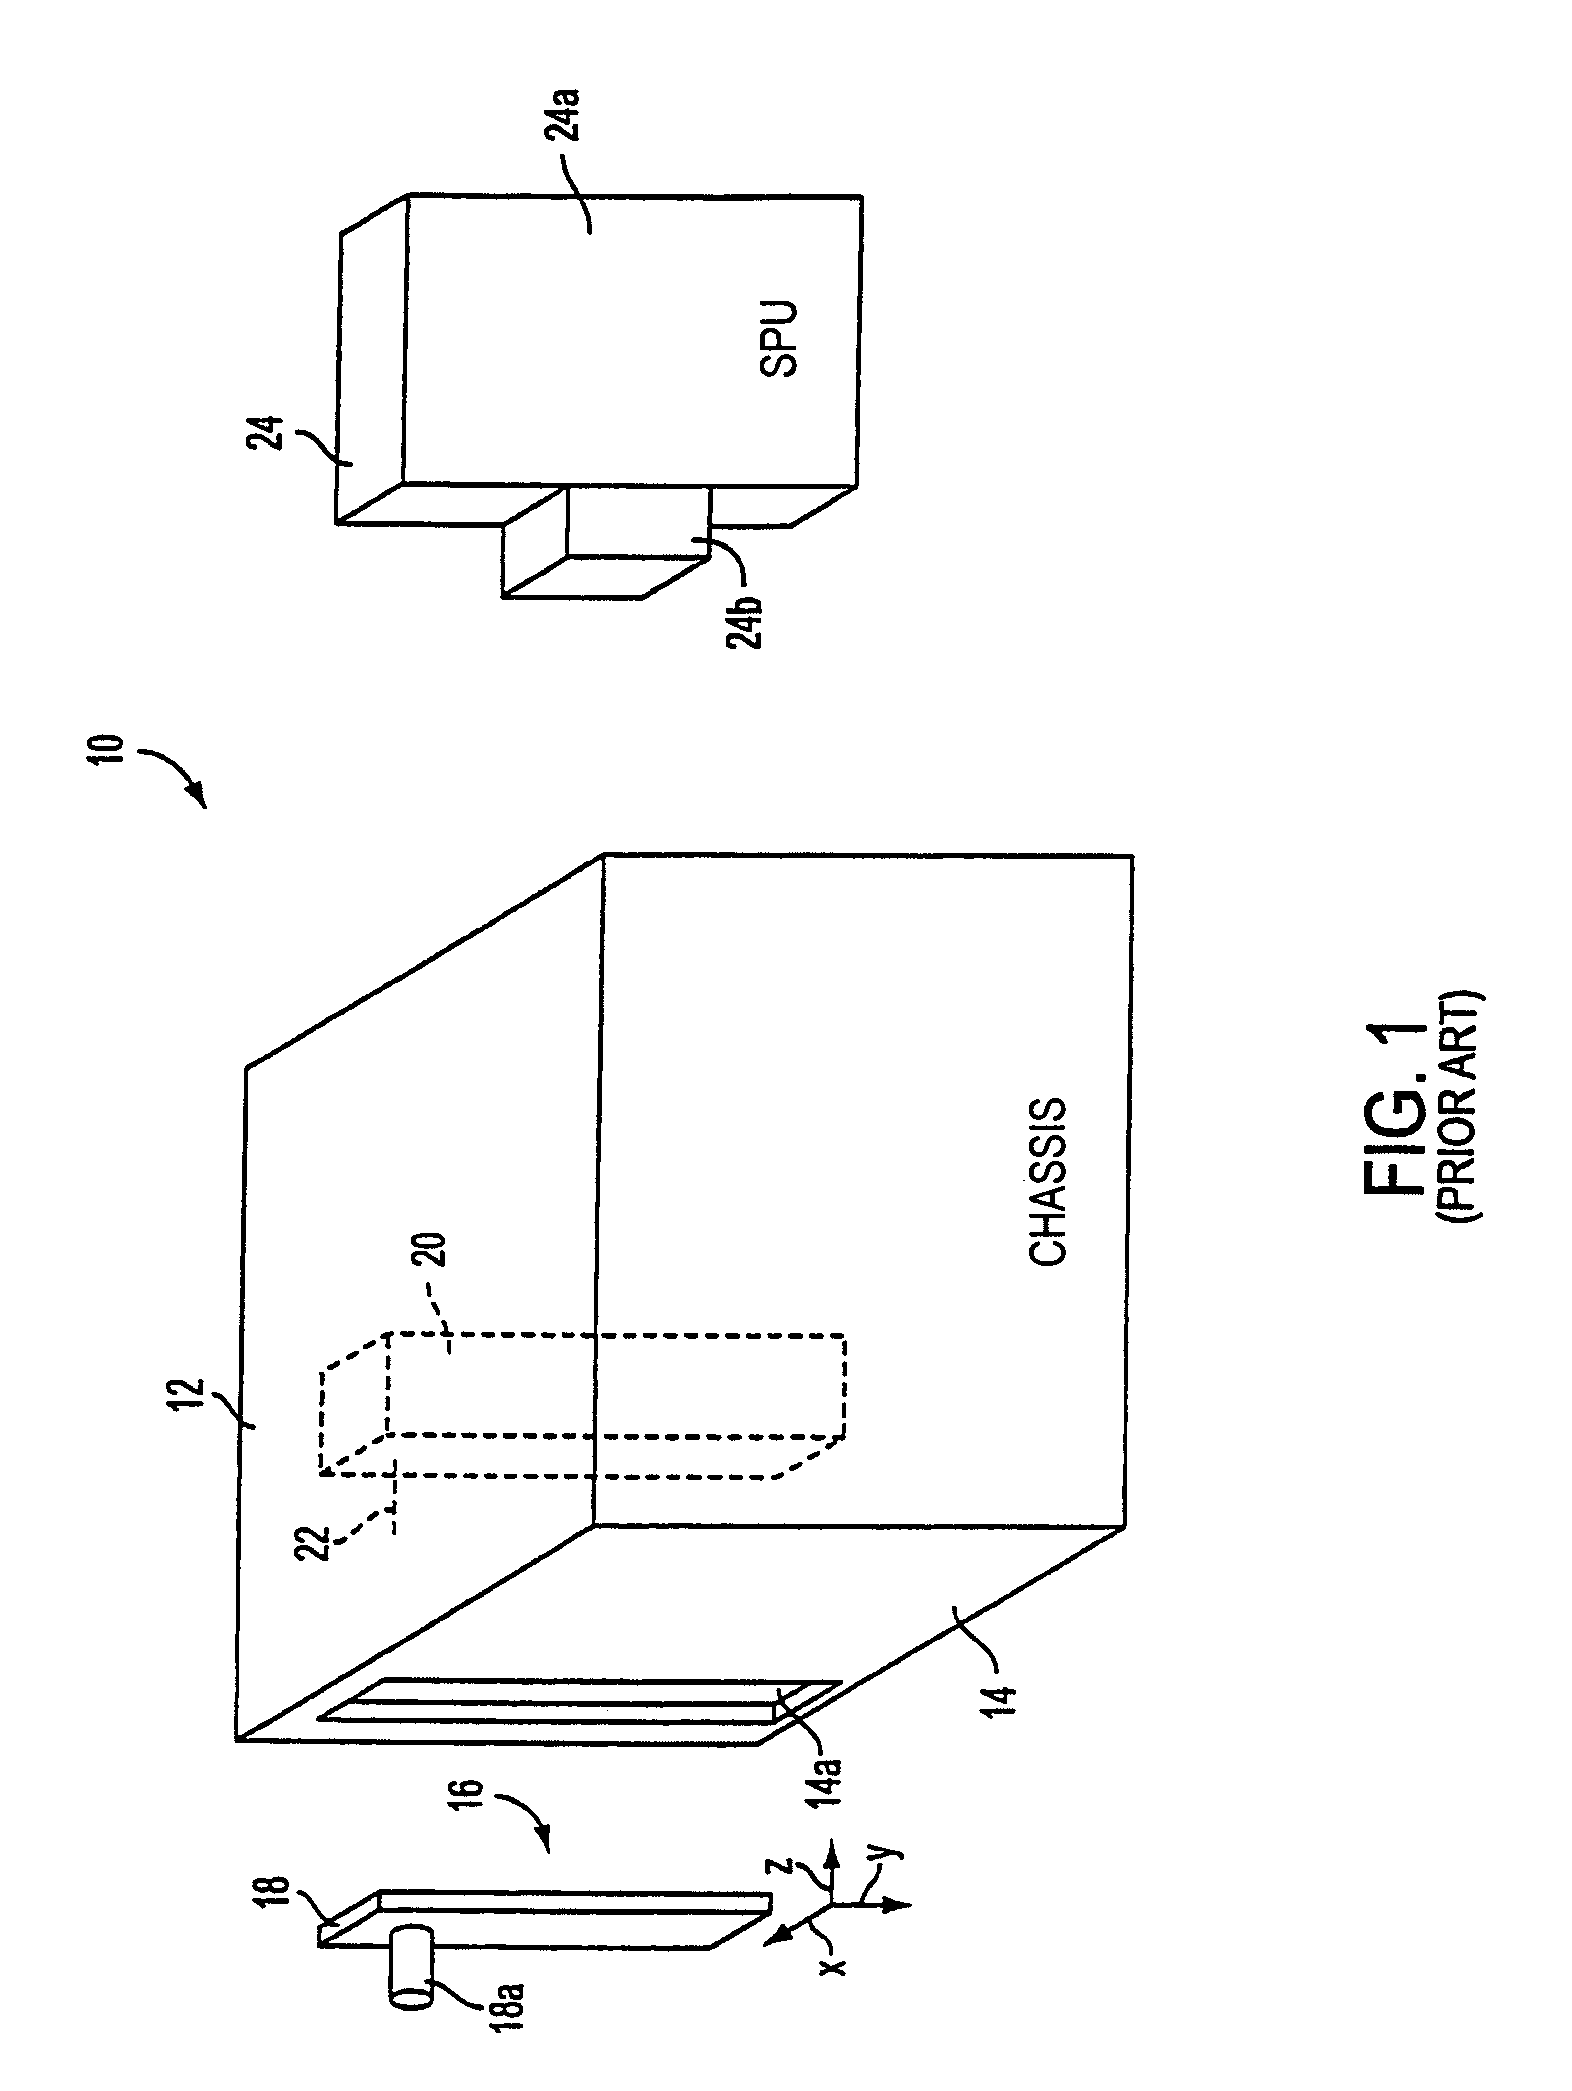 Connection apparatus for CCTV systems